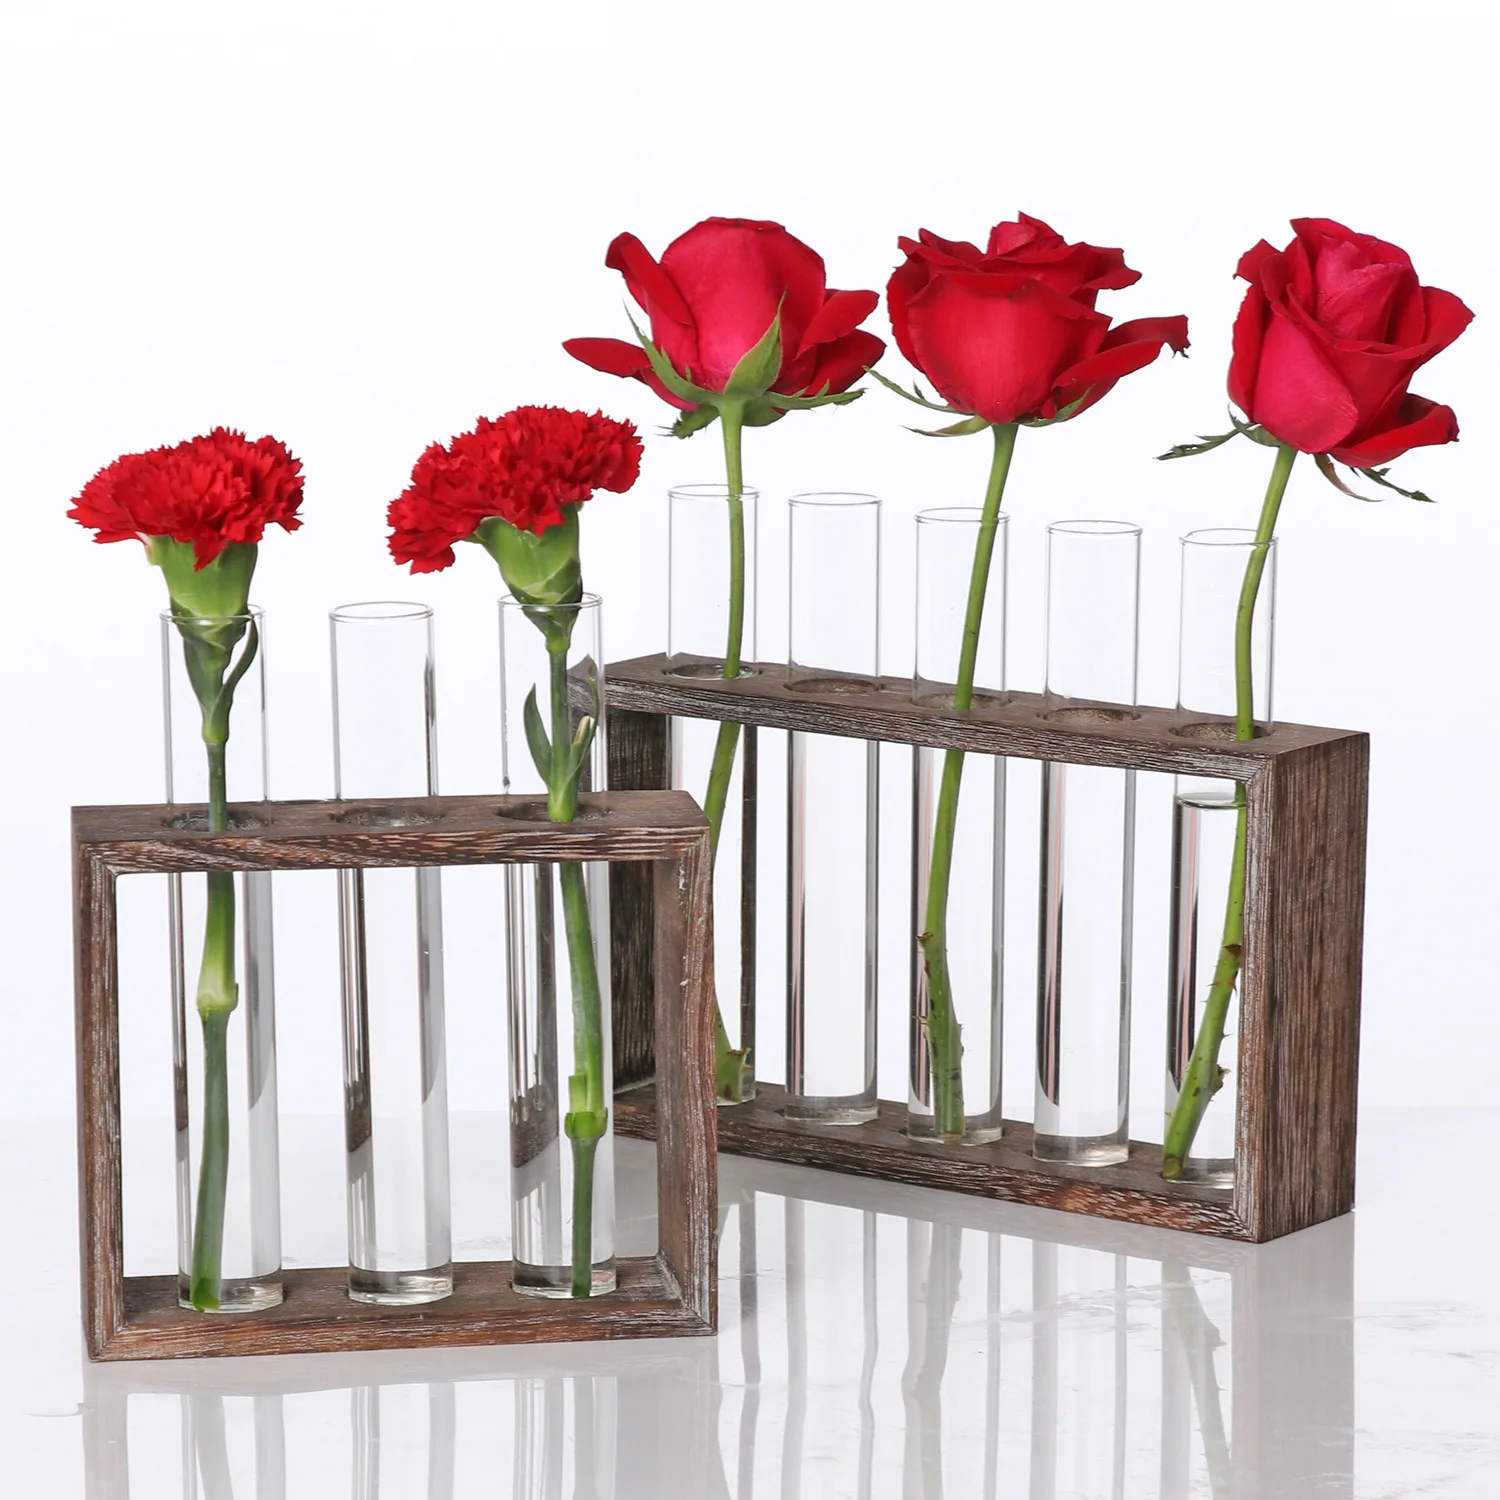 

Glass Planter Propagation Station, Wall Hanging Plant Terrarium with Wooden Stand, Glass Test Tube Flowers Bud Vase, Transparent